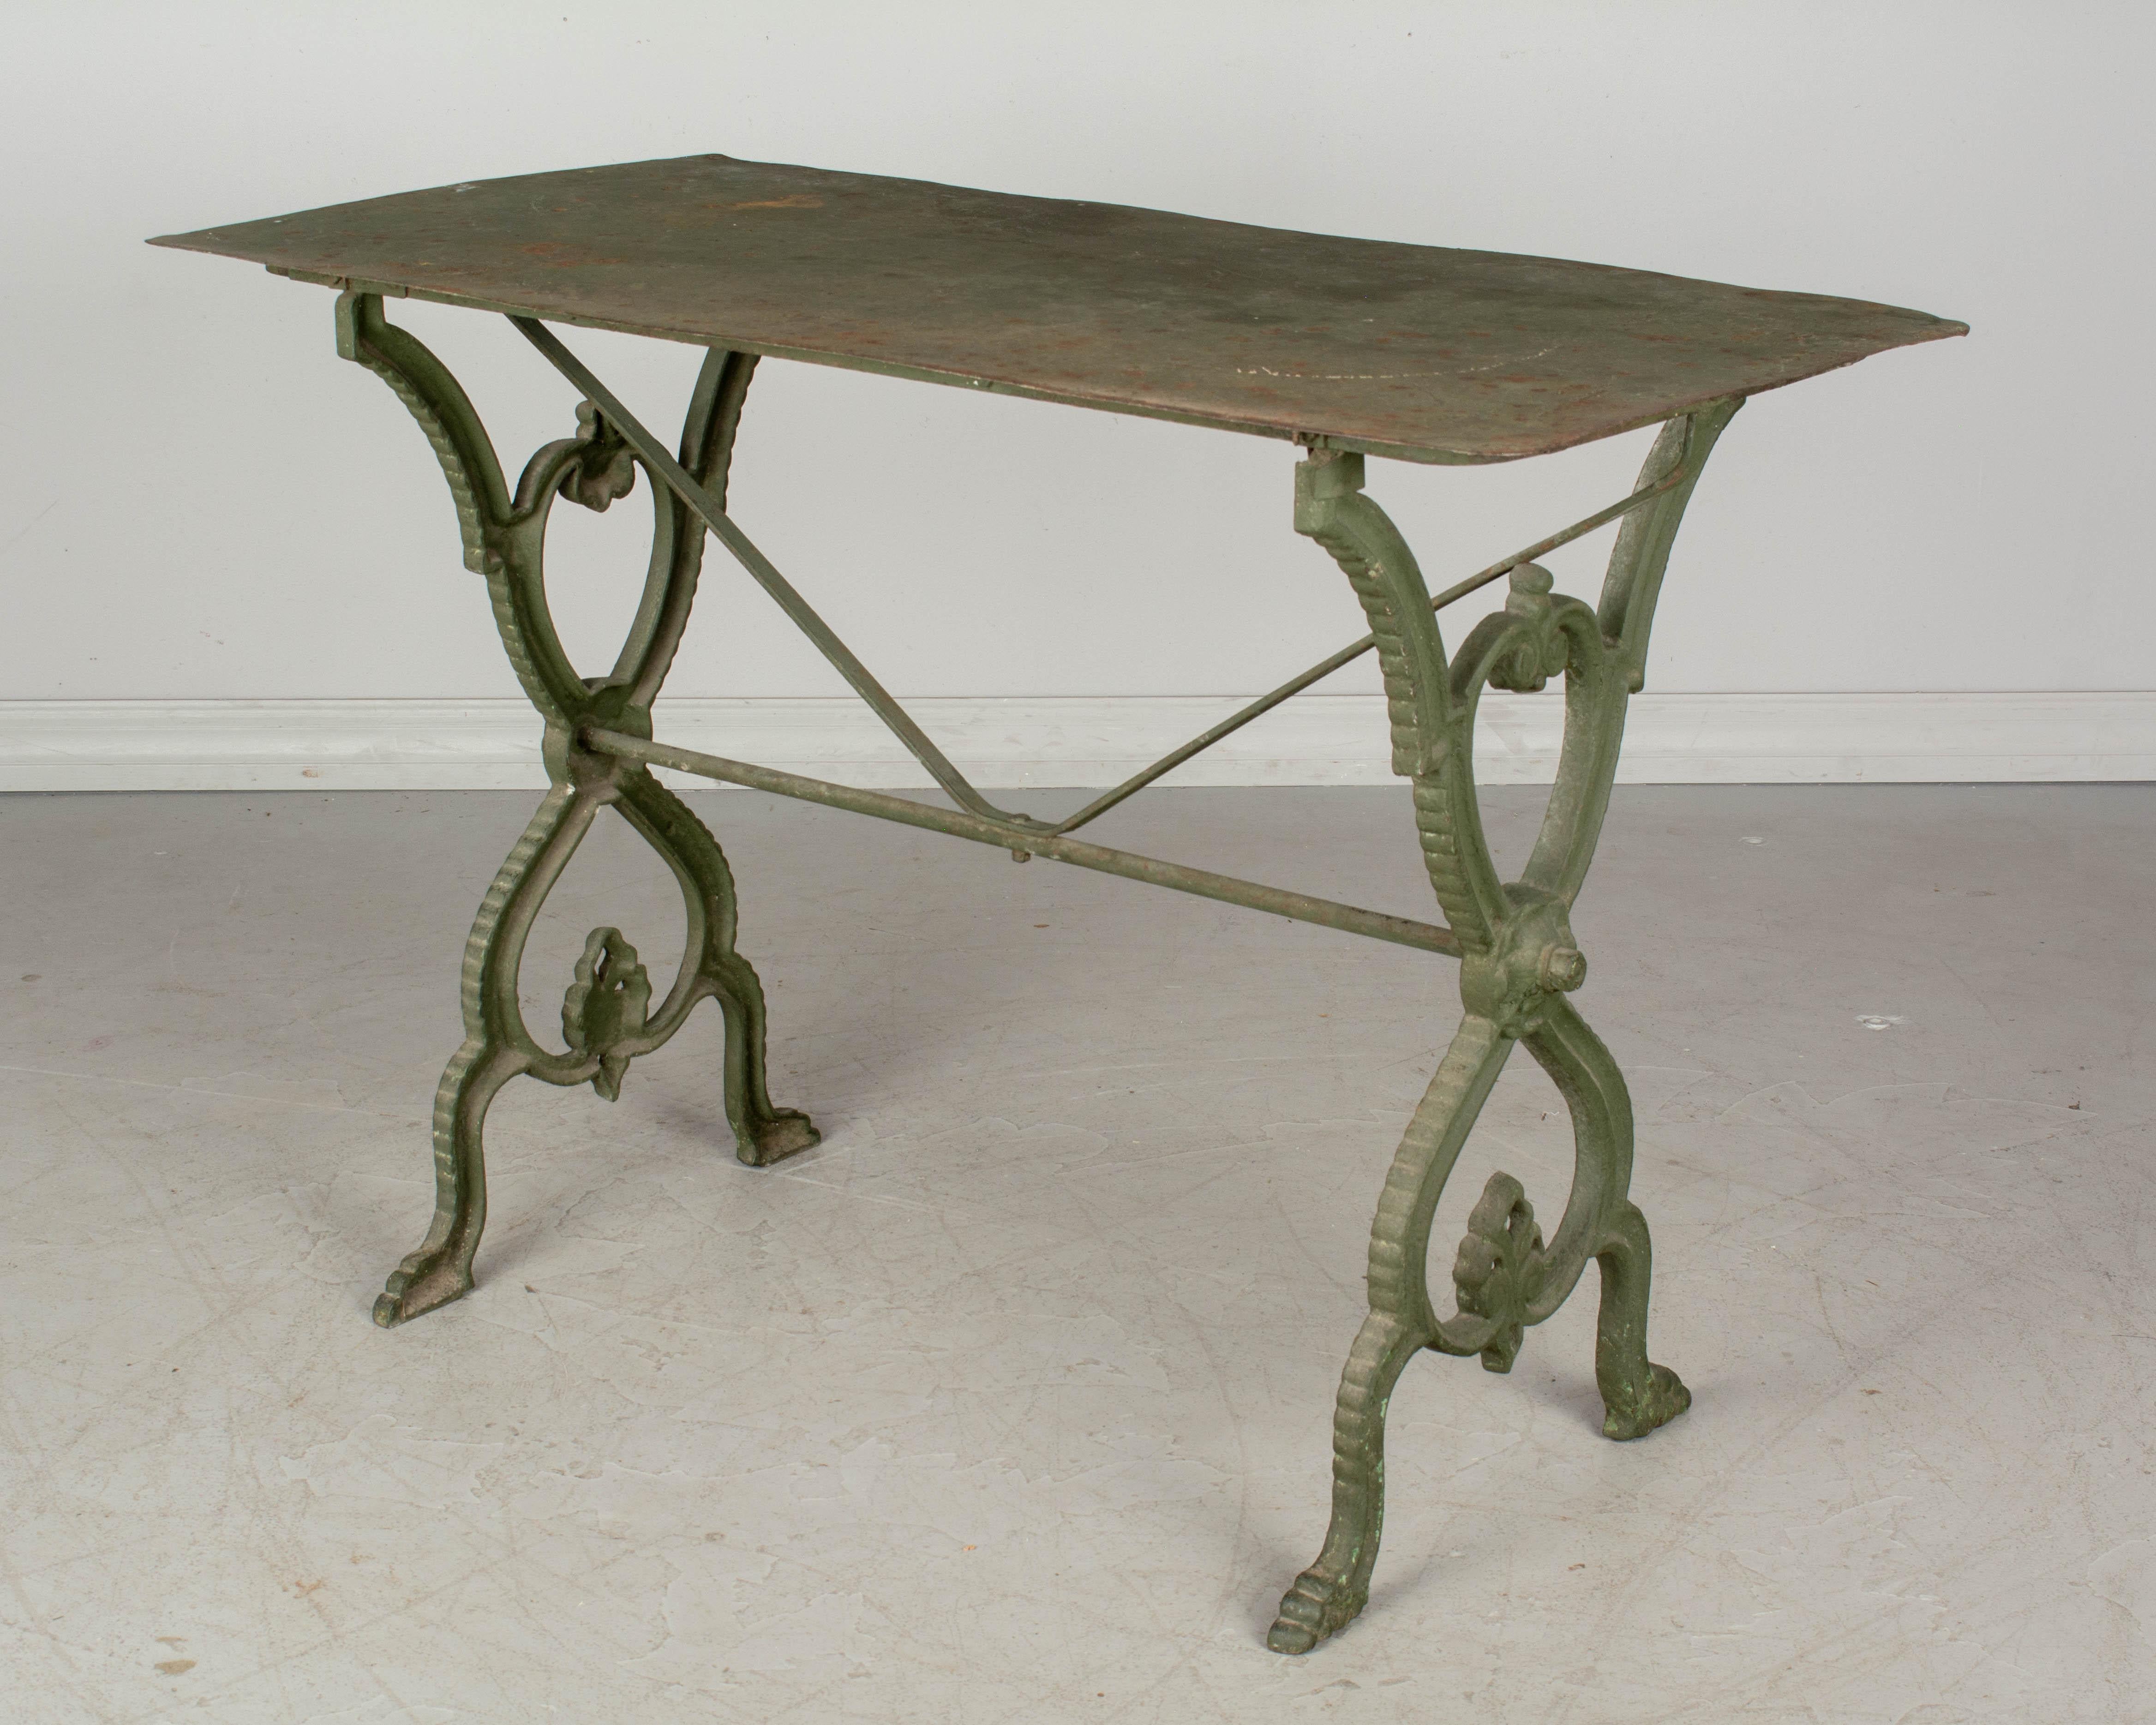 A French cast iron garden bistro table with old verdigris painted finish. Tole top with weathered rusty patina. Good quality casting with decorative Fleur de Lis form at the base. Perfect for outdoor use. Please refer to photos for more details. 
  